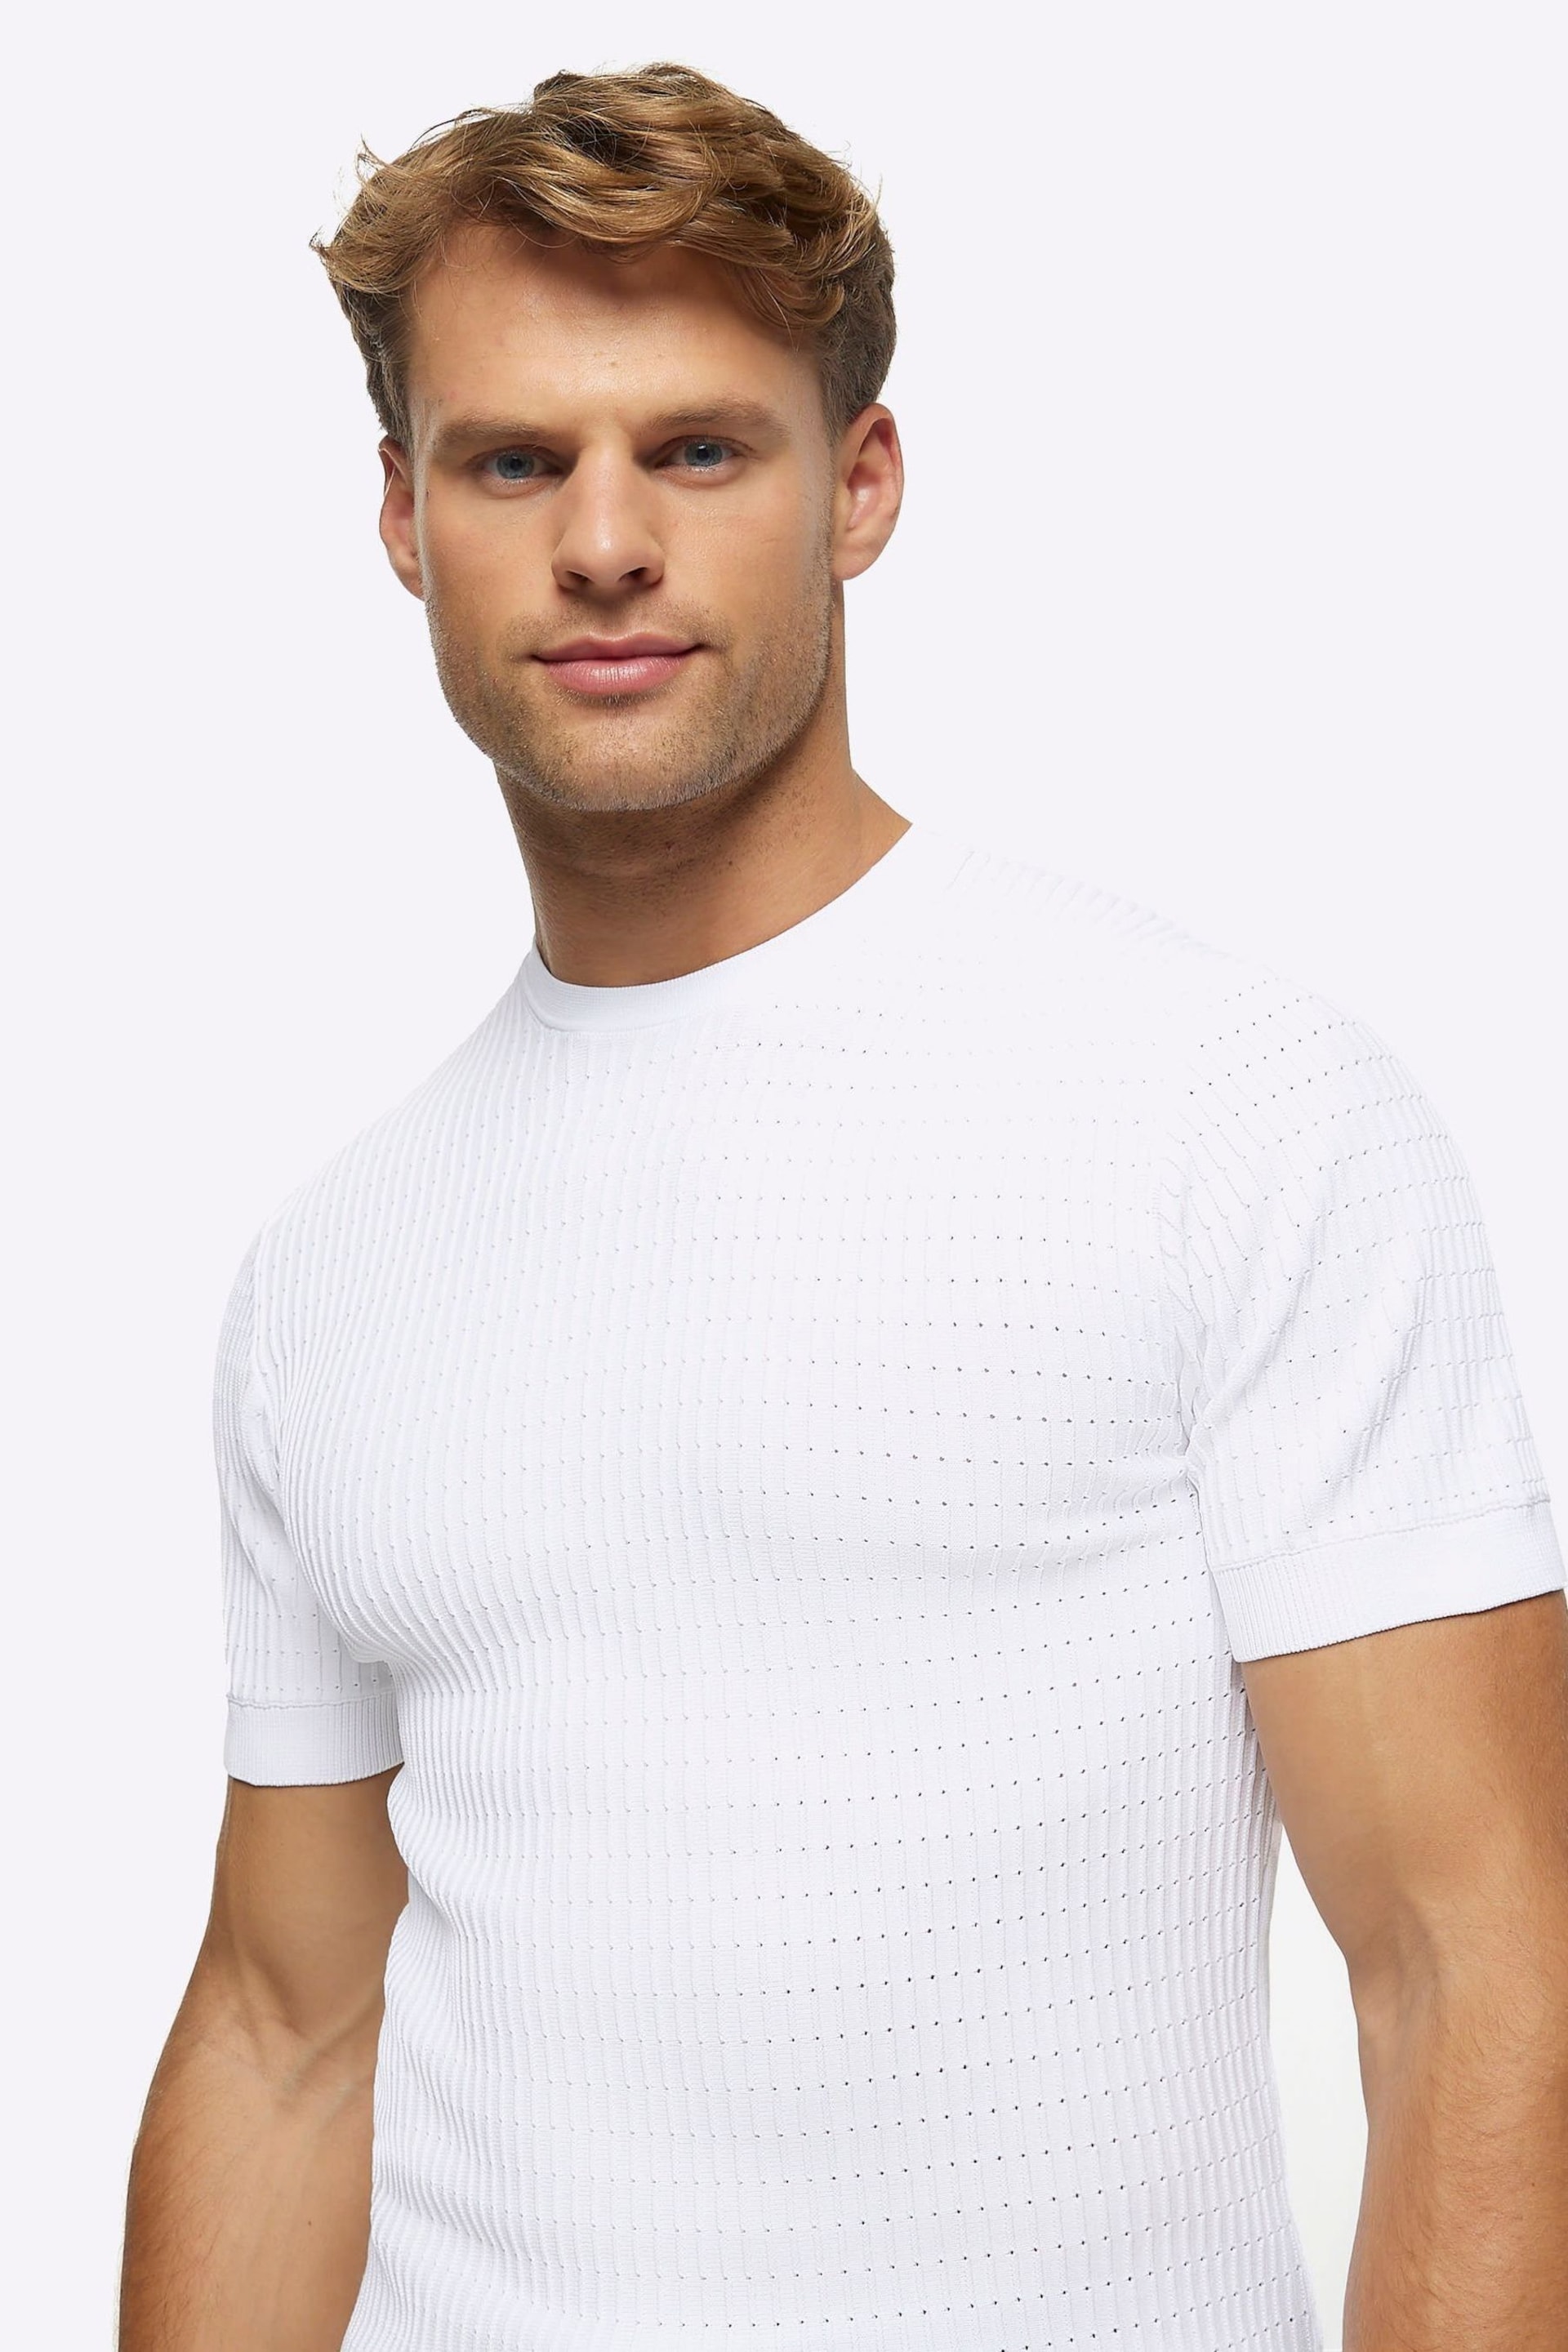 River Island White Muscle Fit Brick T-Shirt - Image 3 of 4